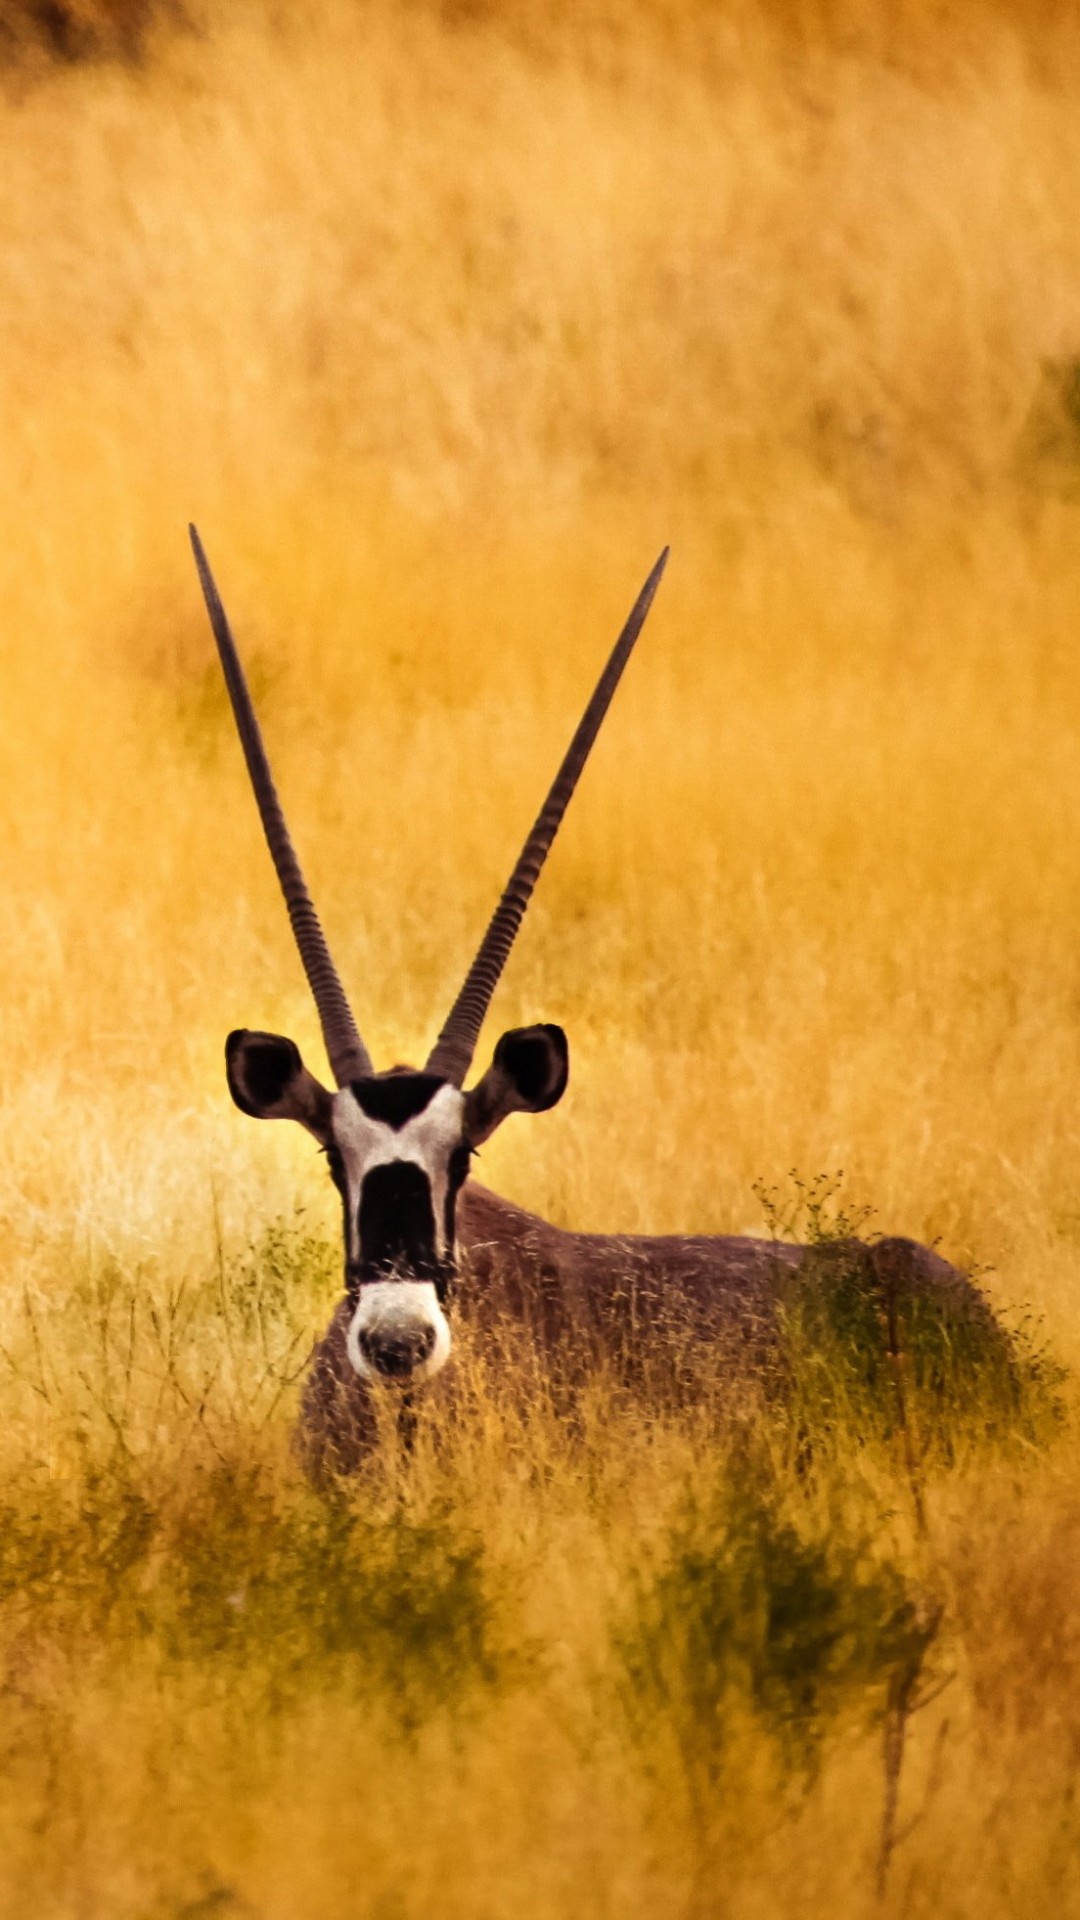 Antelope In The Savanna Wallpaper for SONY Xperia Z3